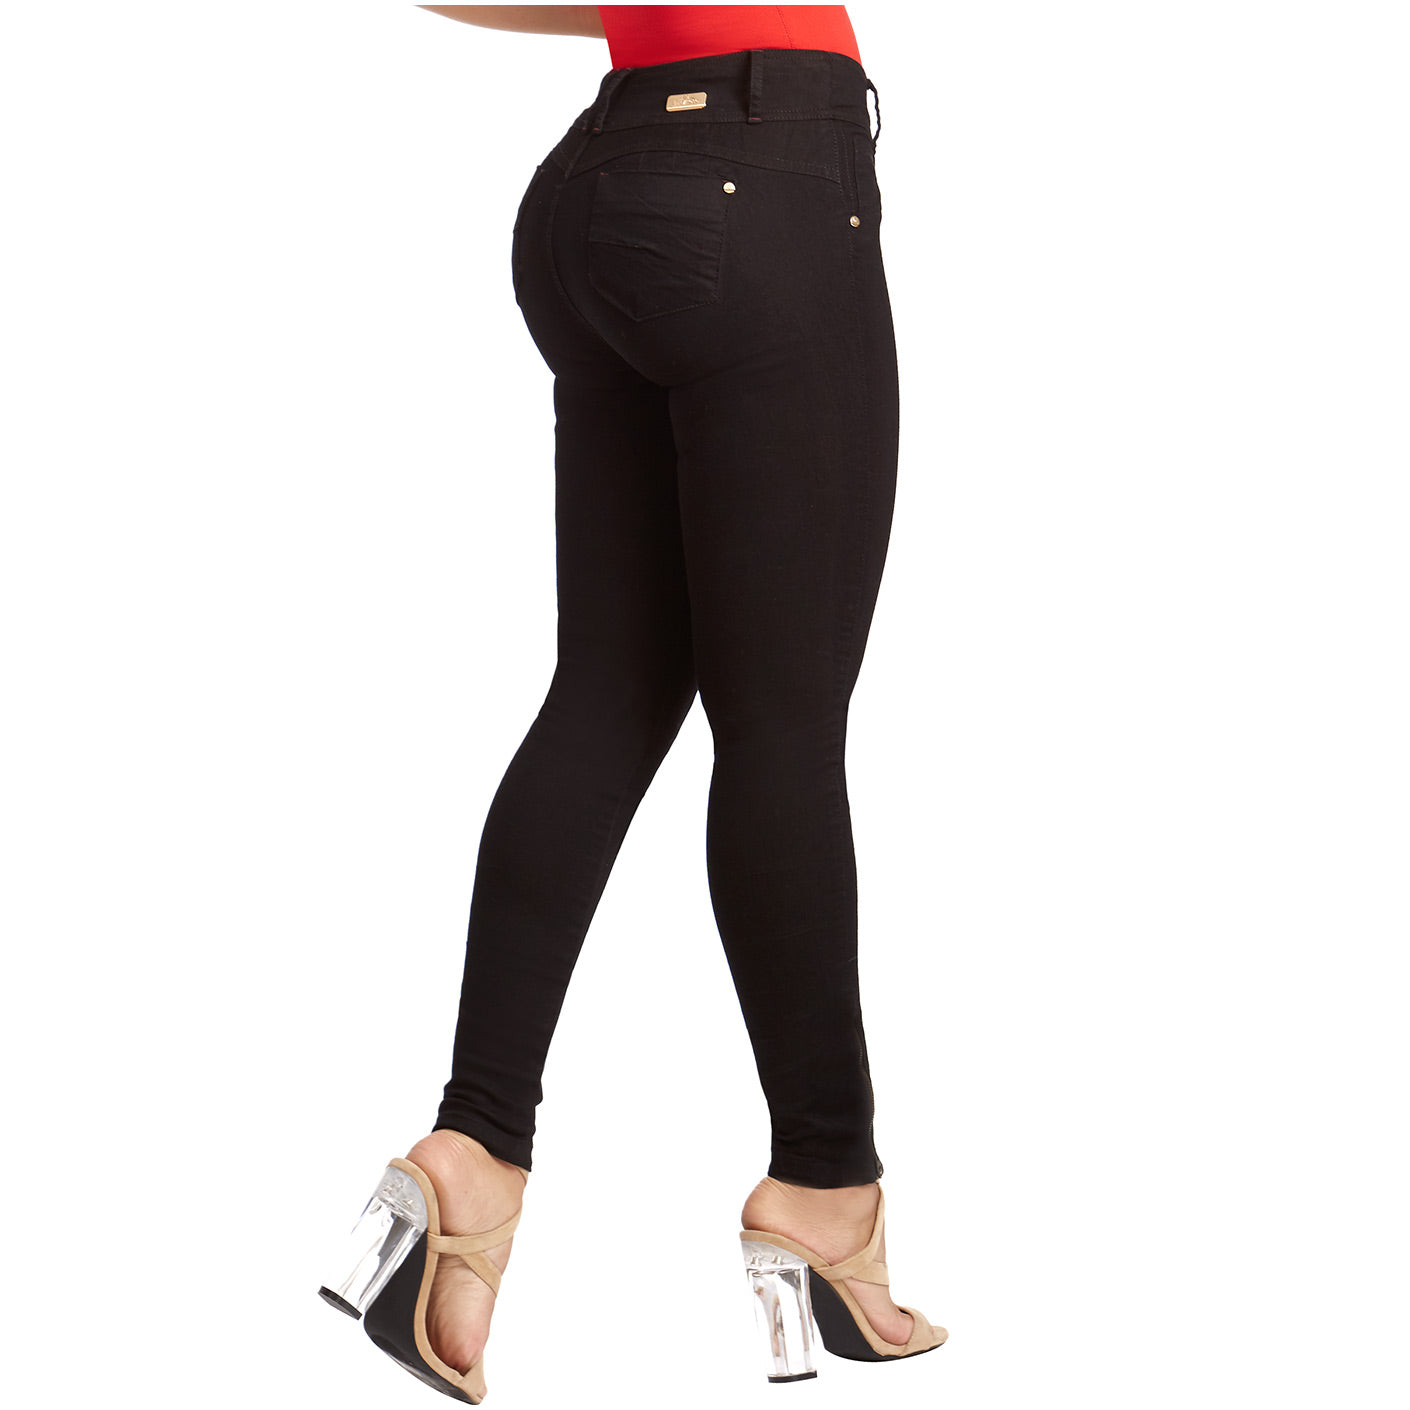 LT.Rose IS1B03 : Colombian Butt Lifting Skinny Jeans | Enhance Your Curves and Feel Confident | Chica Sexy